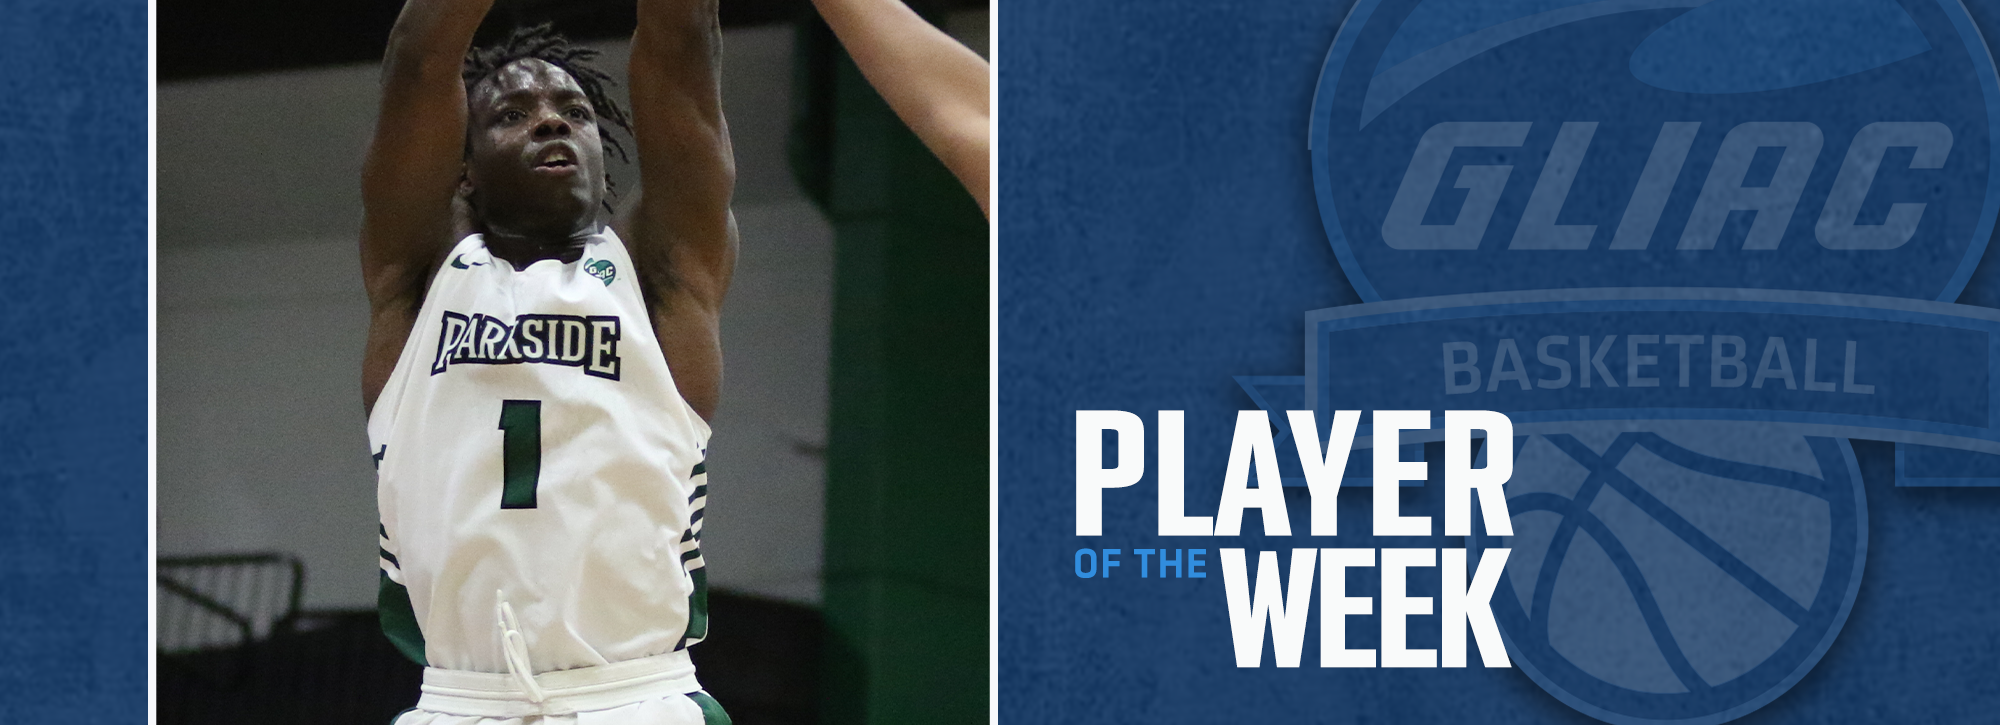 Parkside's Bello earns GLIAC Men's Basketball Player of the Week honors